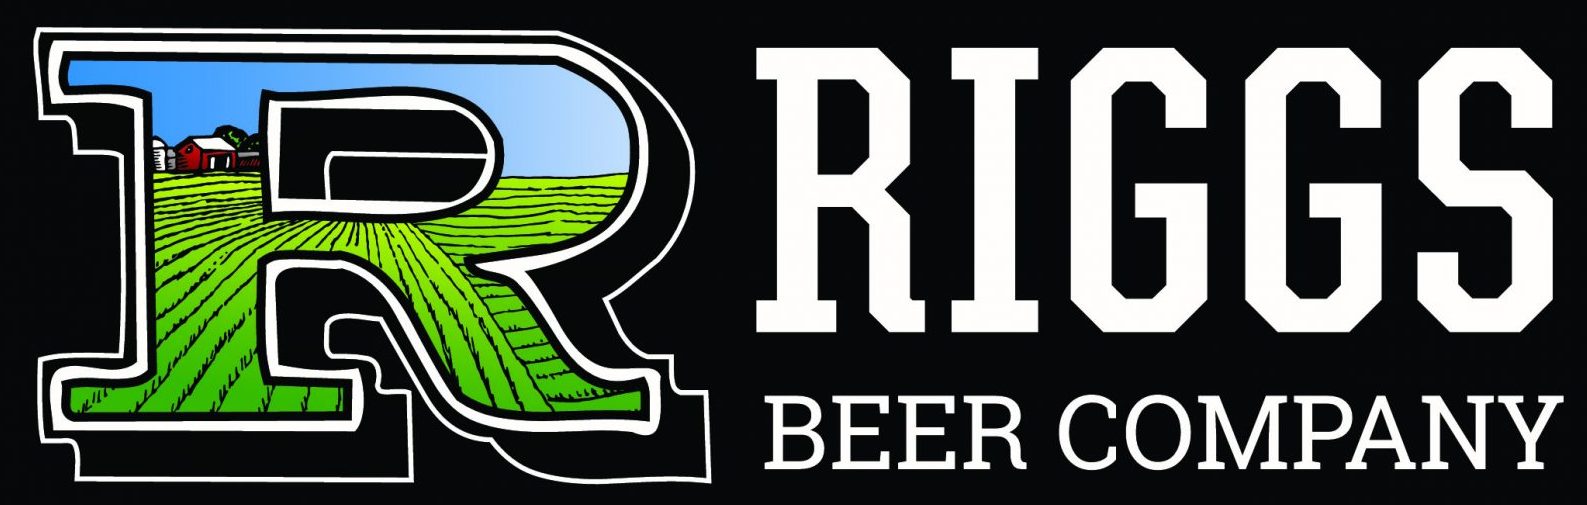 Riggs Beer Company